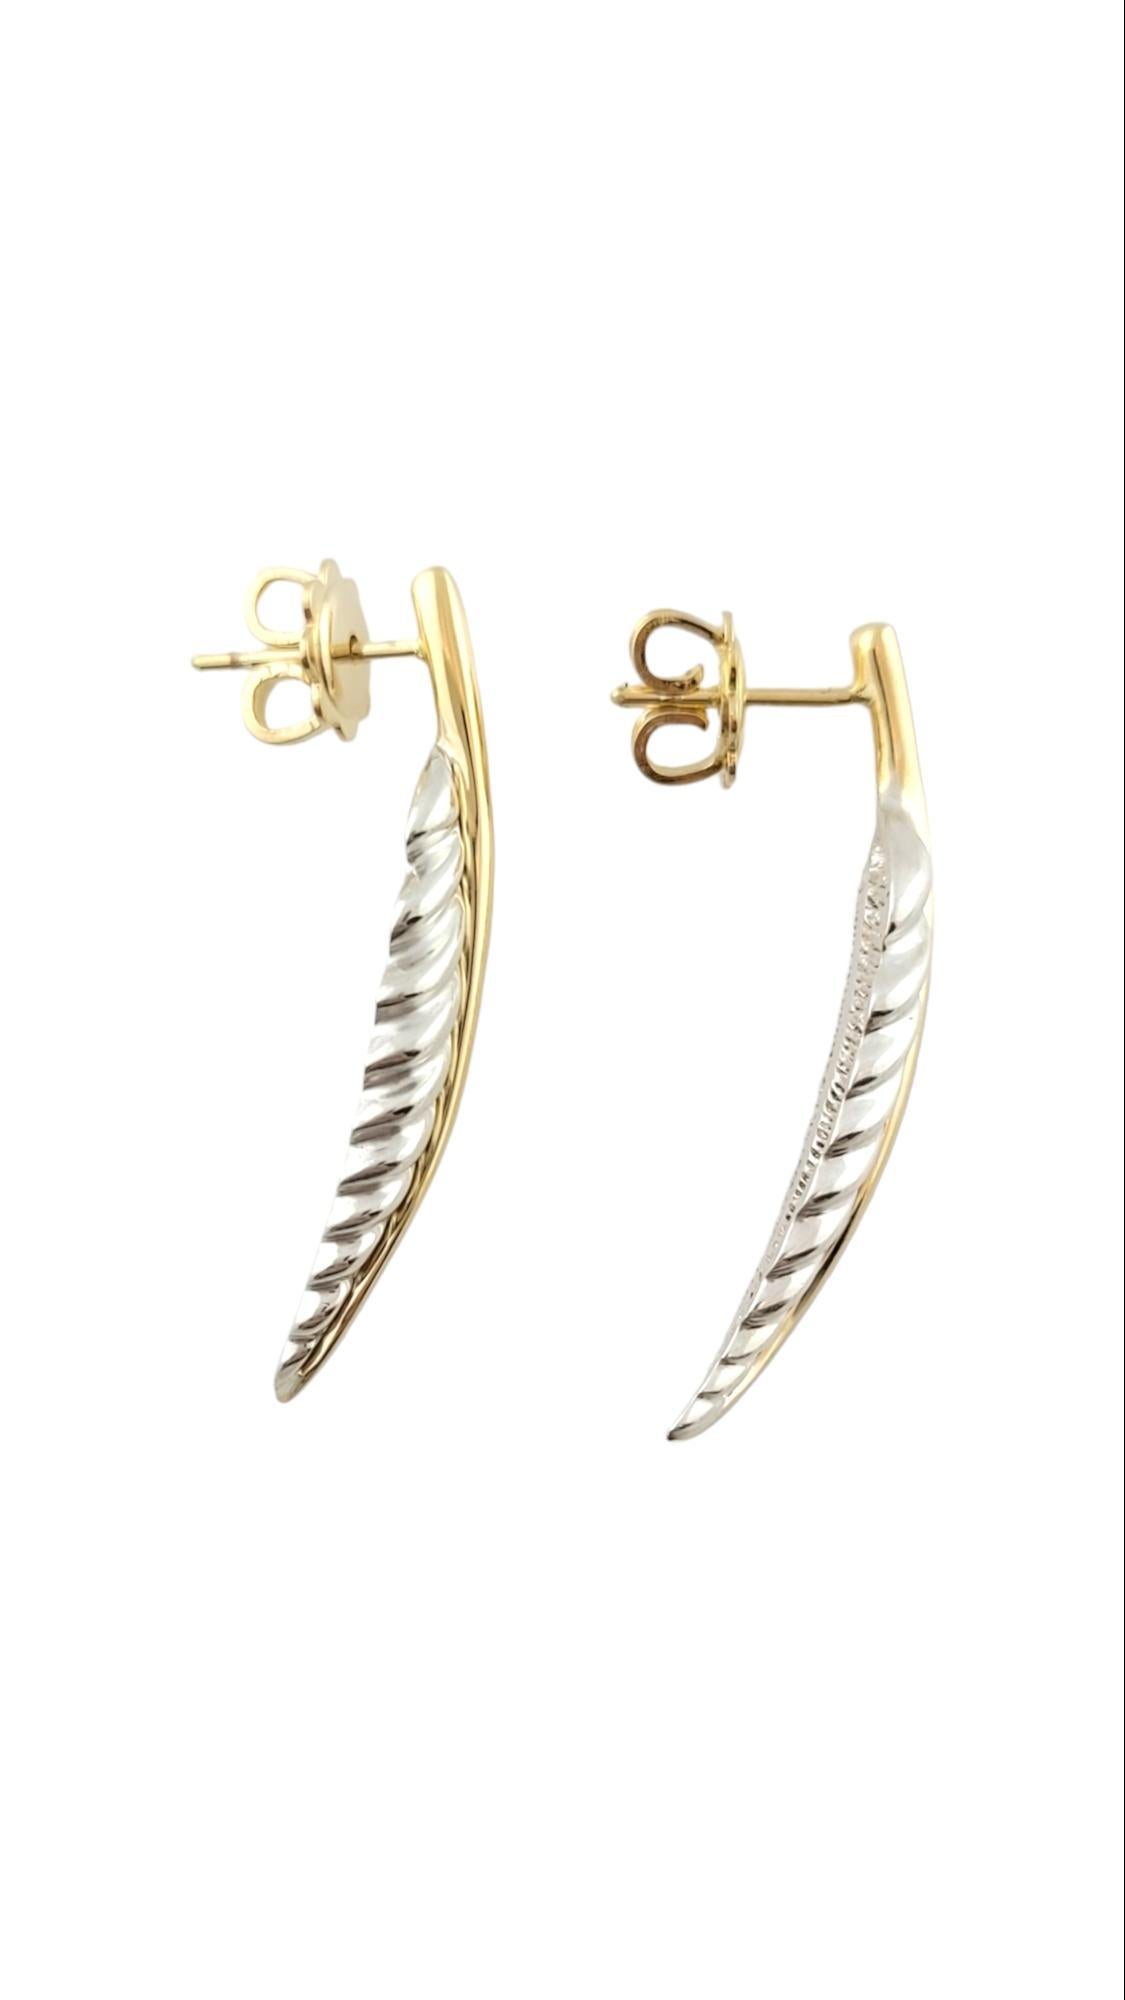 Vintage Tiffany & Co Sterling Silver 18K Yellow Gold Feather Earrings w/ Tiffany Box

This gorgeous set of sterling silver Tiffany & Co. earrings feature beautiful feathers with 18K yellow gold detailing!

Size: 33.55mm X 7.35mm

Weight: 6.81 g/